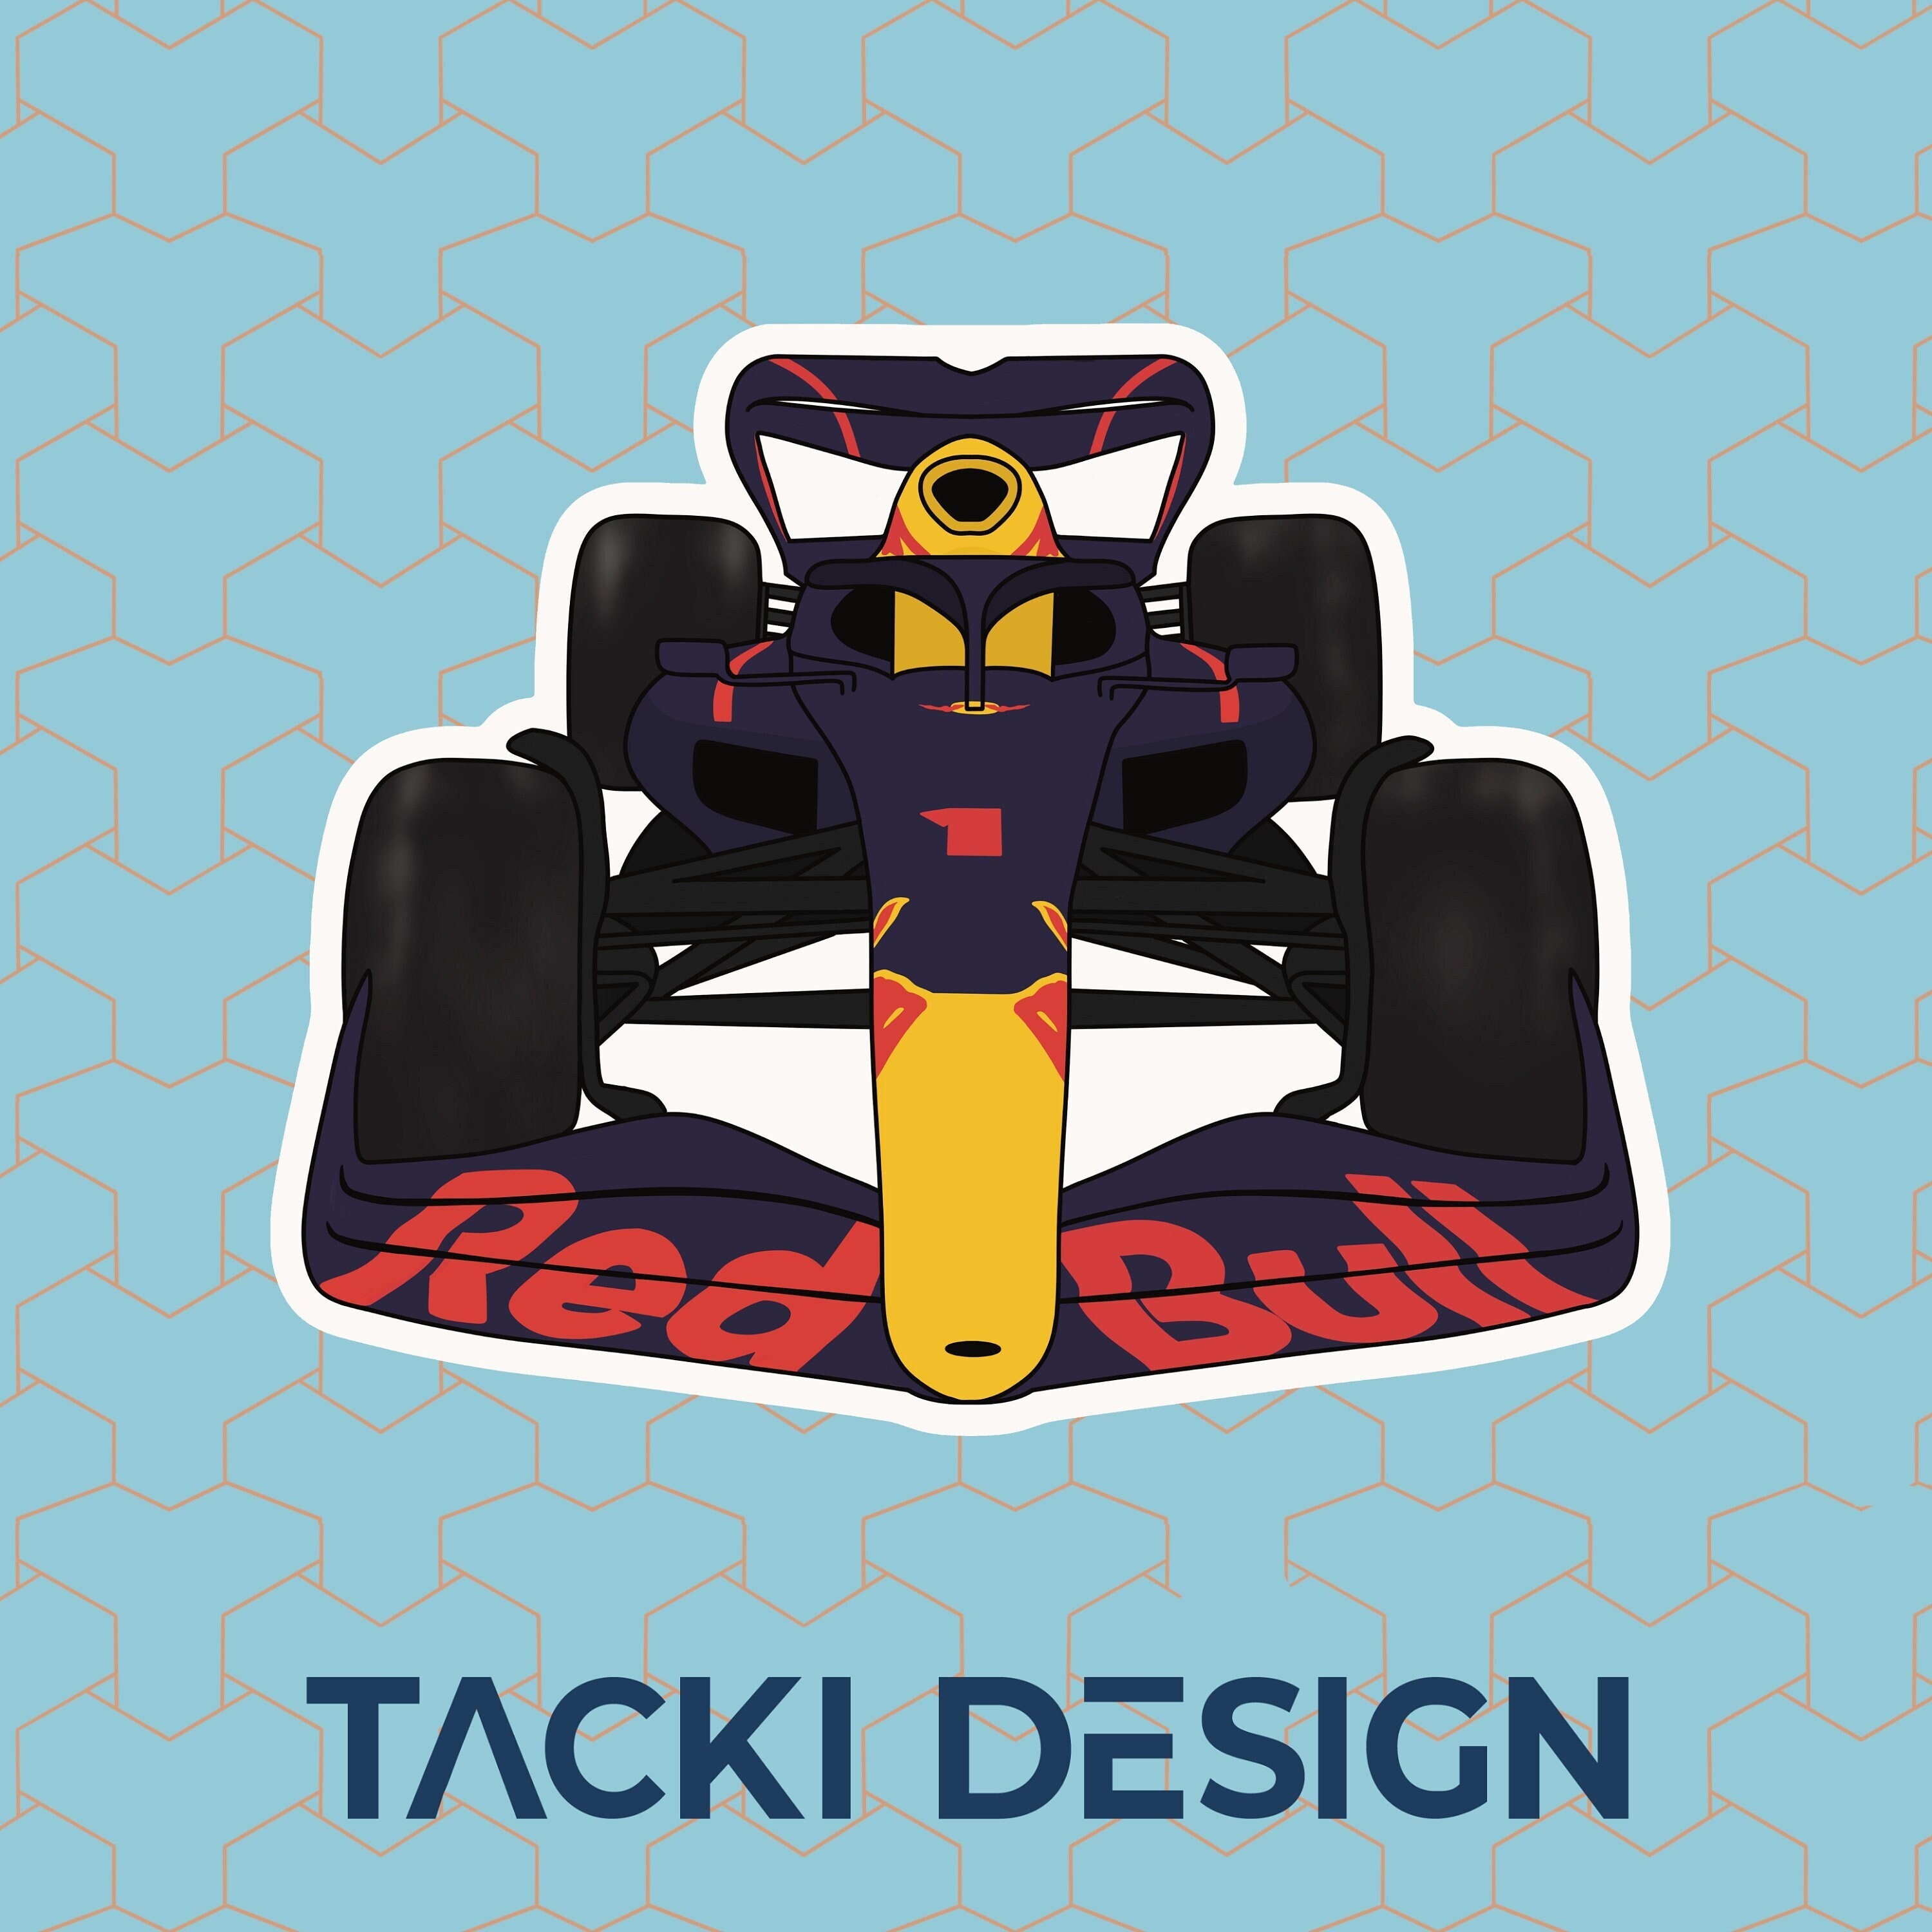 Waterproof Stickers - ORACLE Red Bull Racing . Abt 6 x 6 cm . Free Normal  Mail, Hobbies & Toys, Stationery & Craft, Art & Prints on Carousell